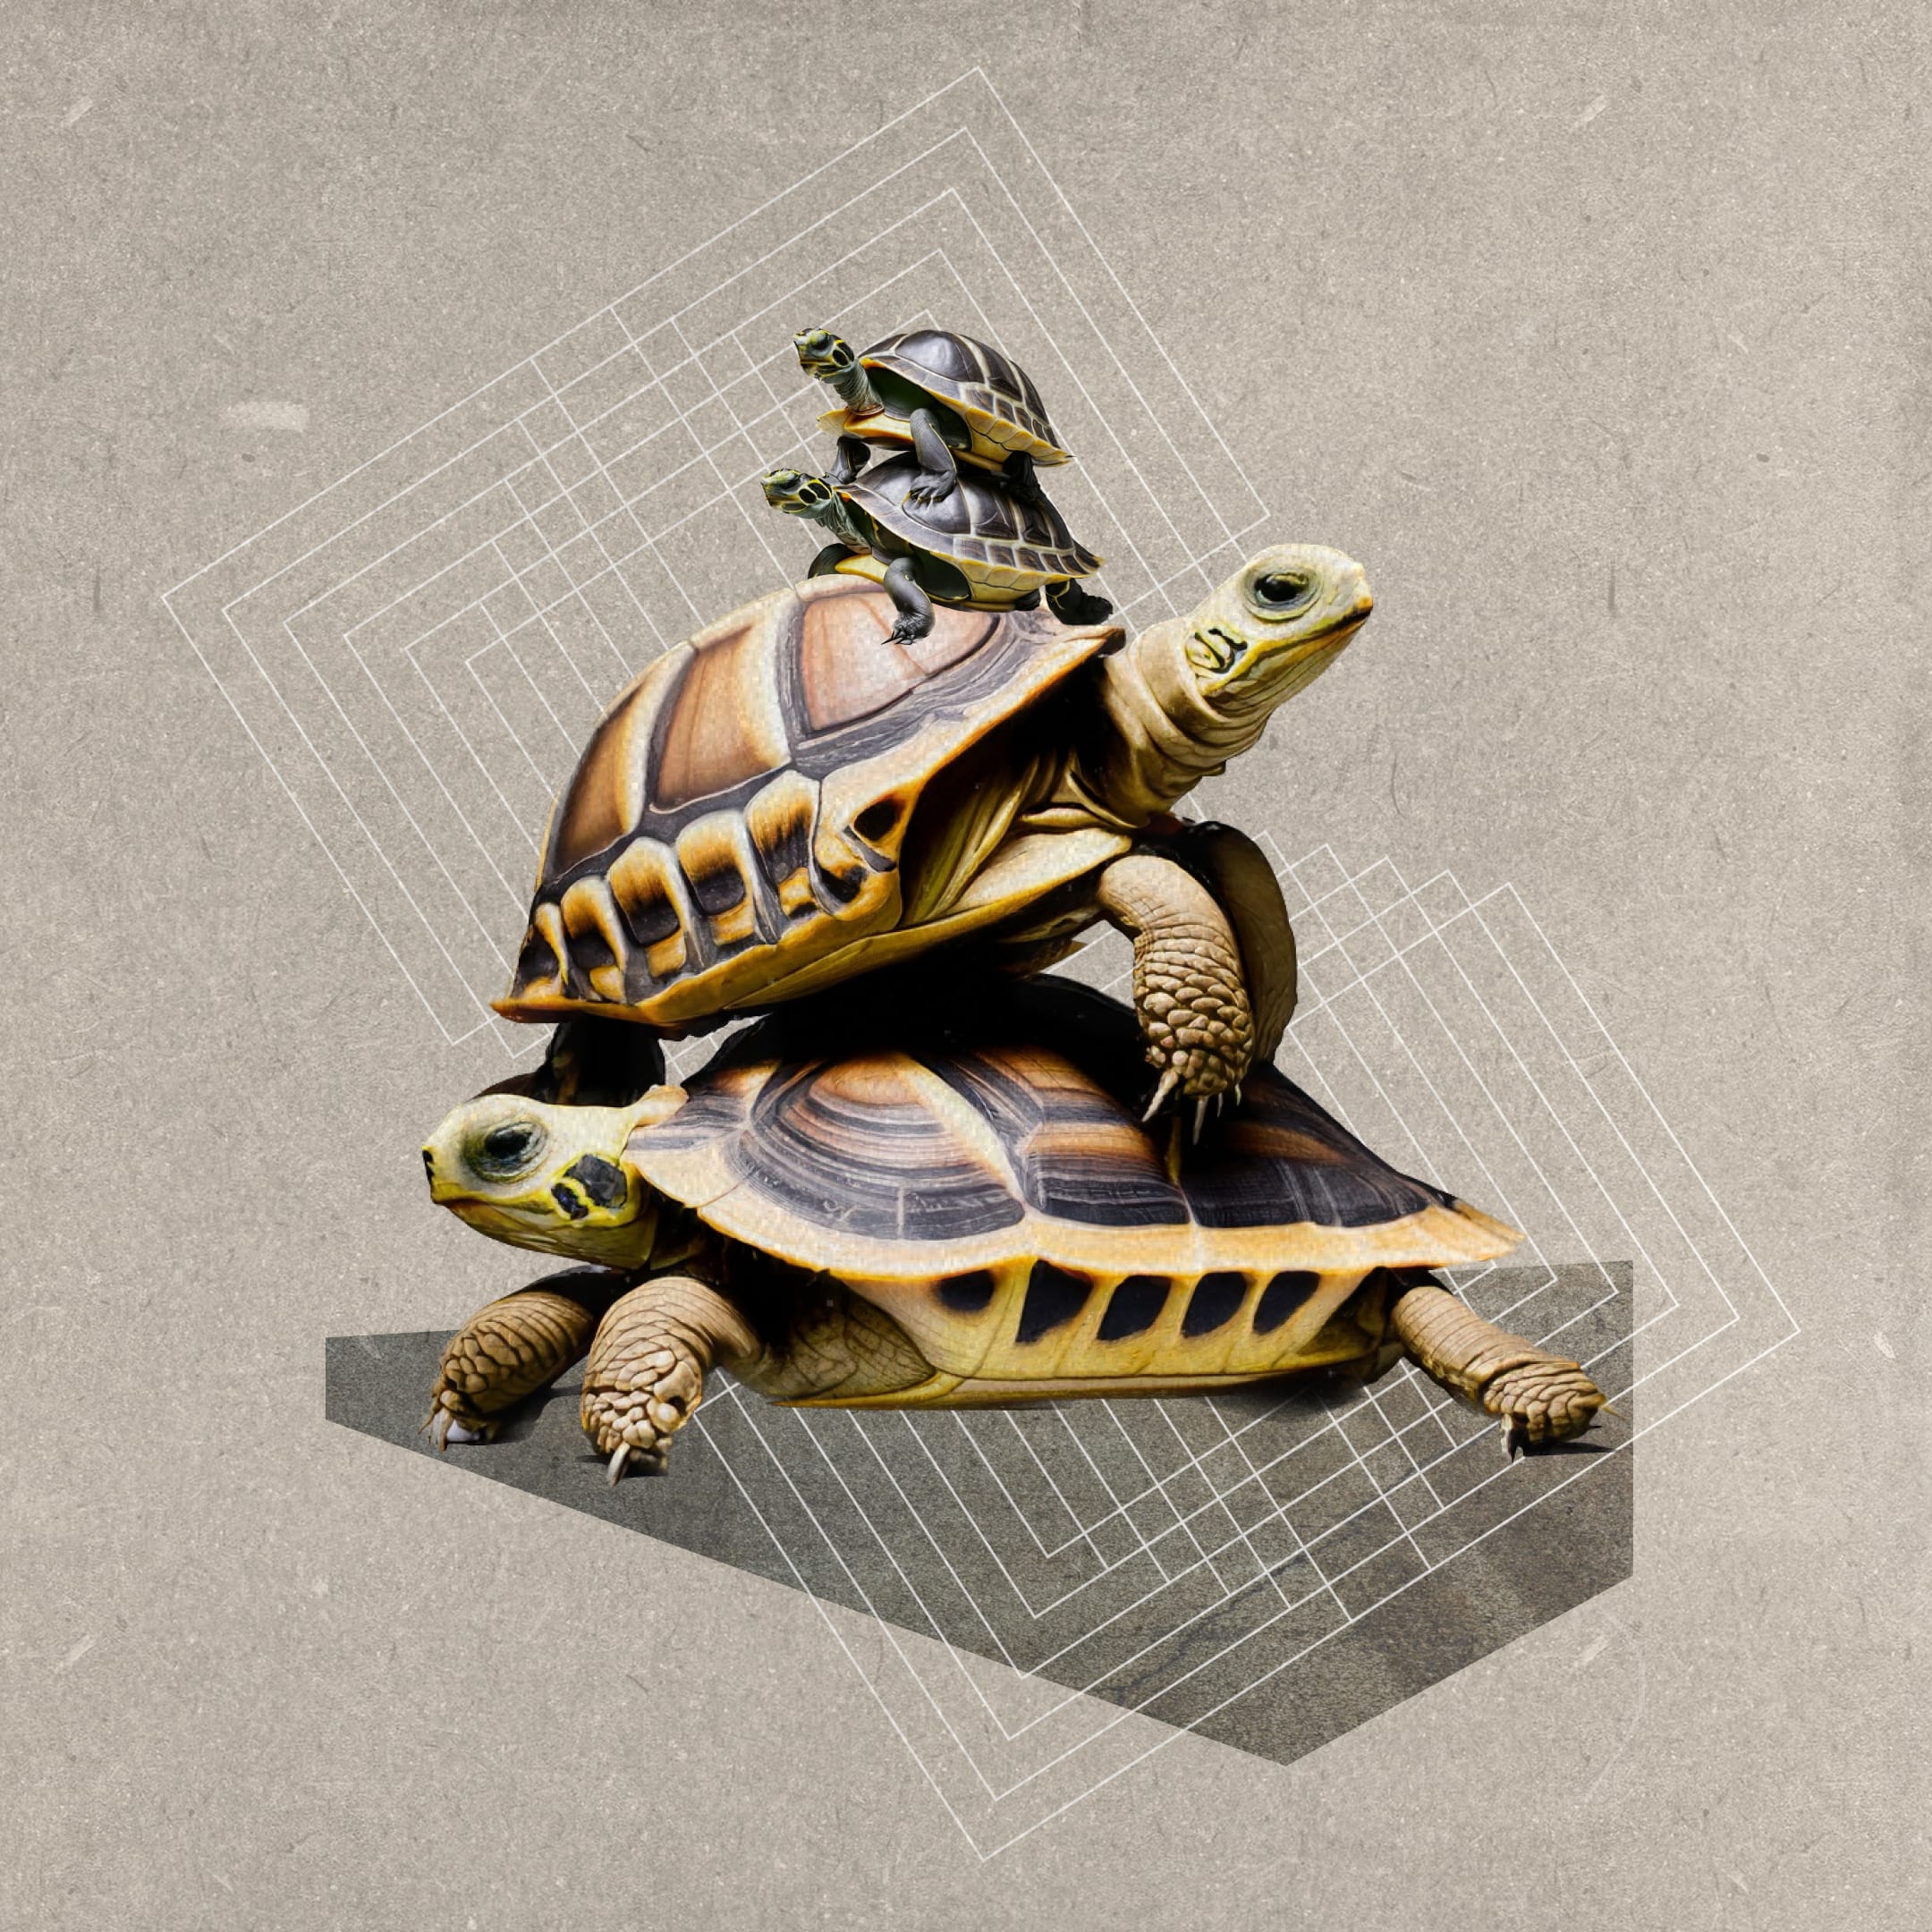 On a paper-textured tan background, a stack of turtles is accompanied by geometrical elements.